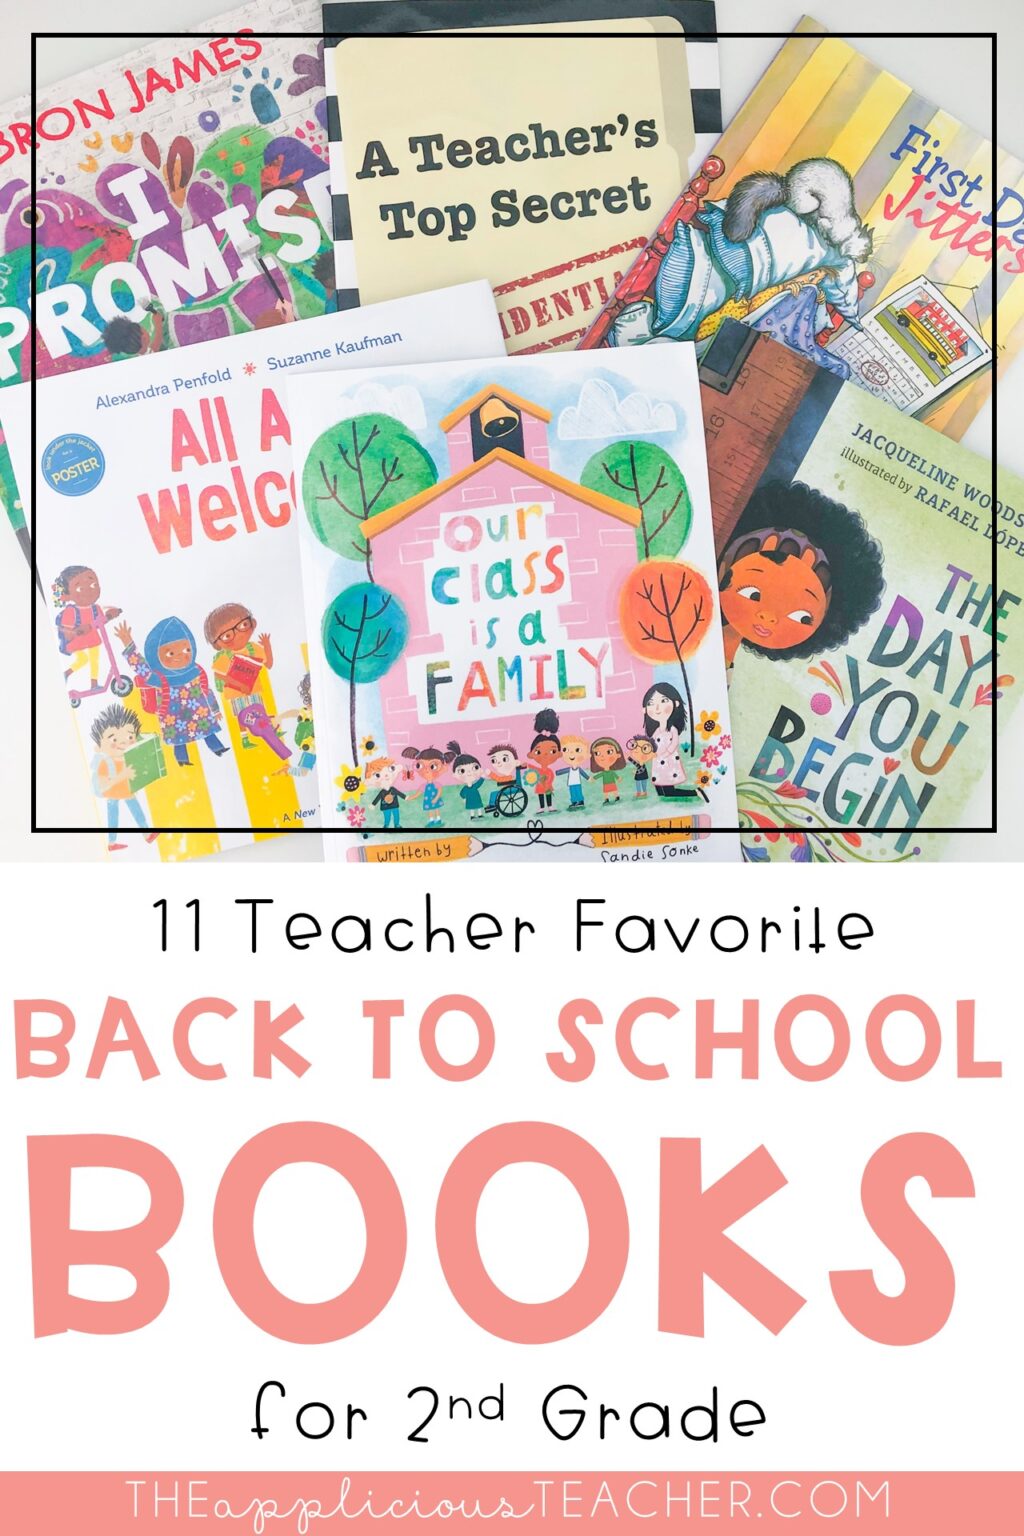 the-best-back-to-school-books-for-2nd-grade-the-applicious-teacher